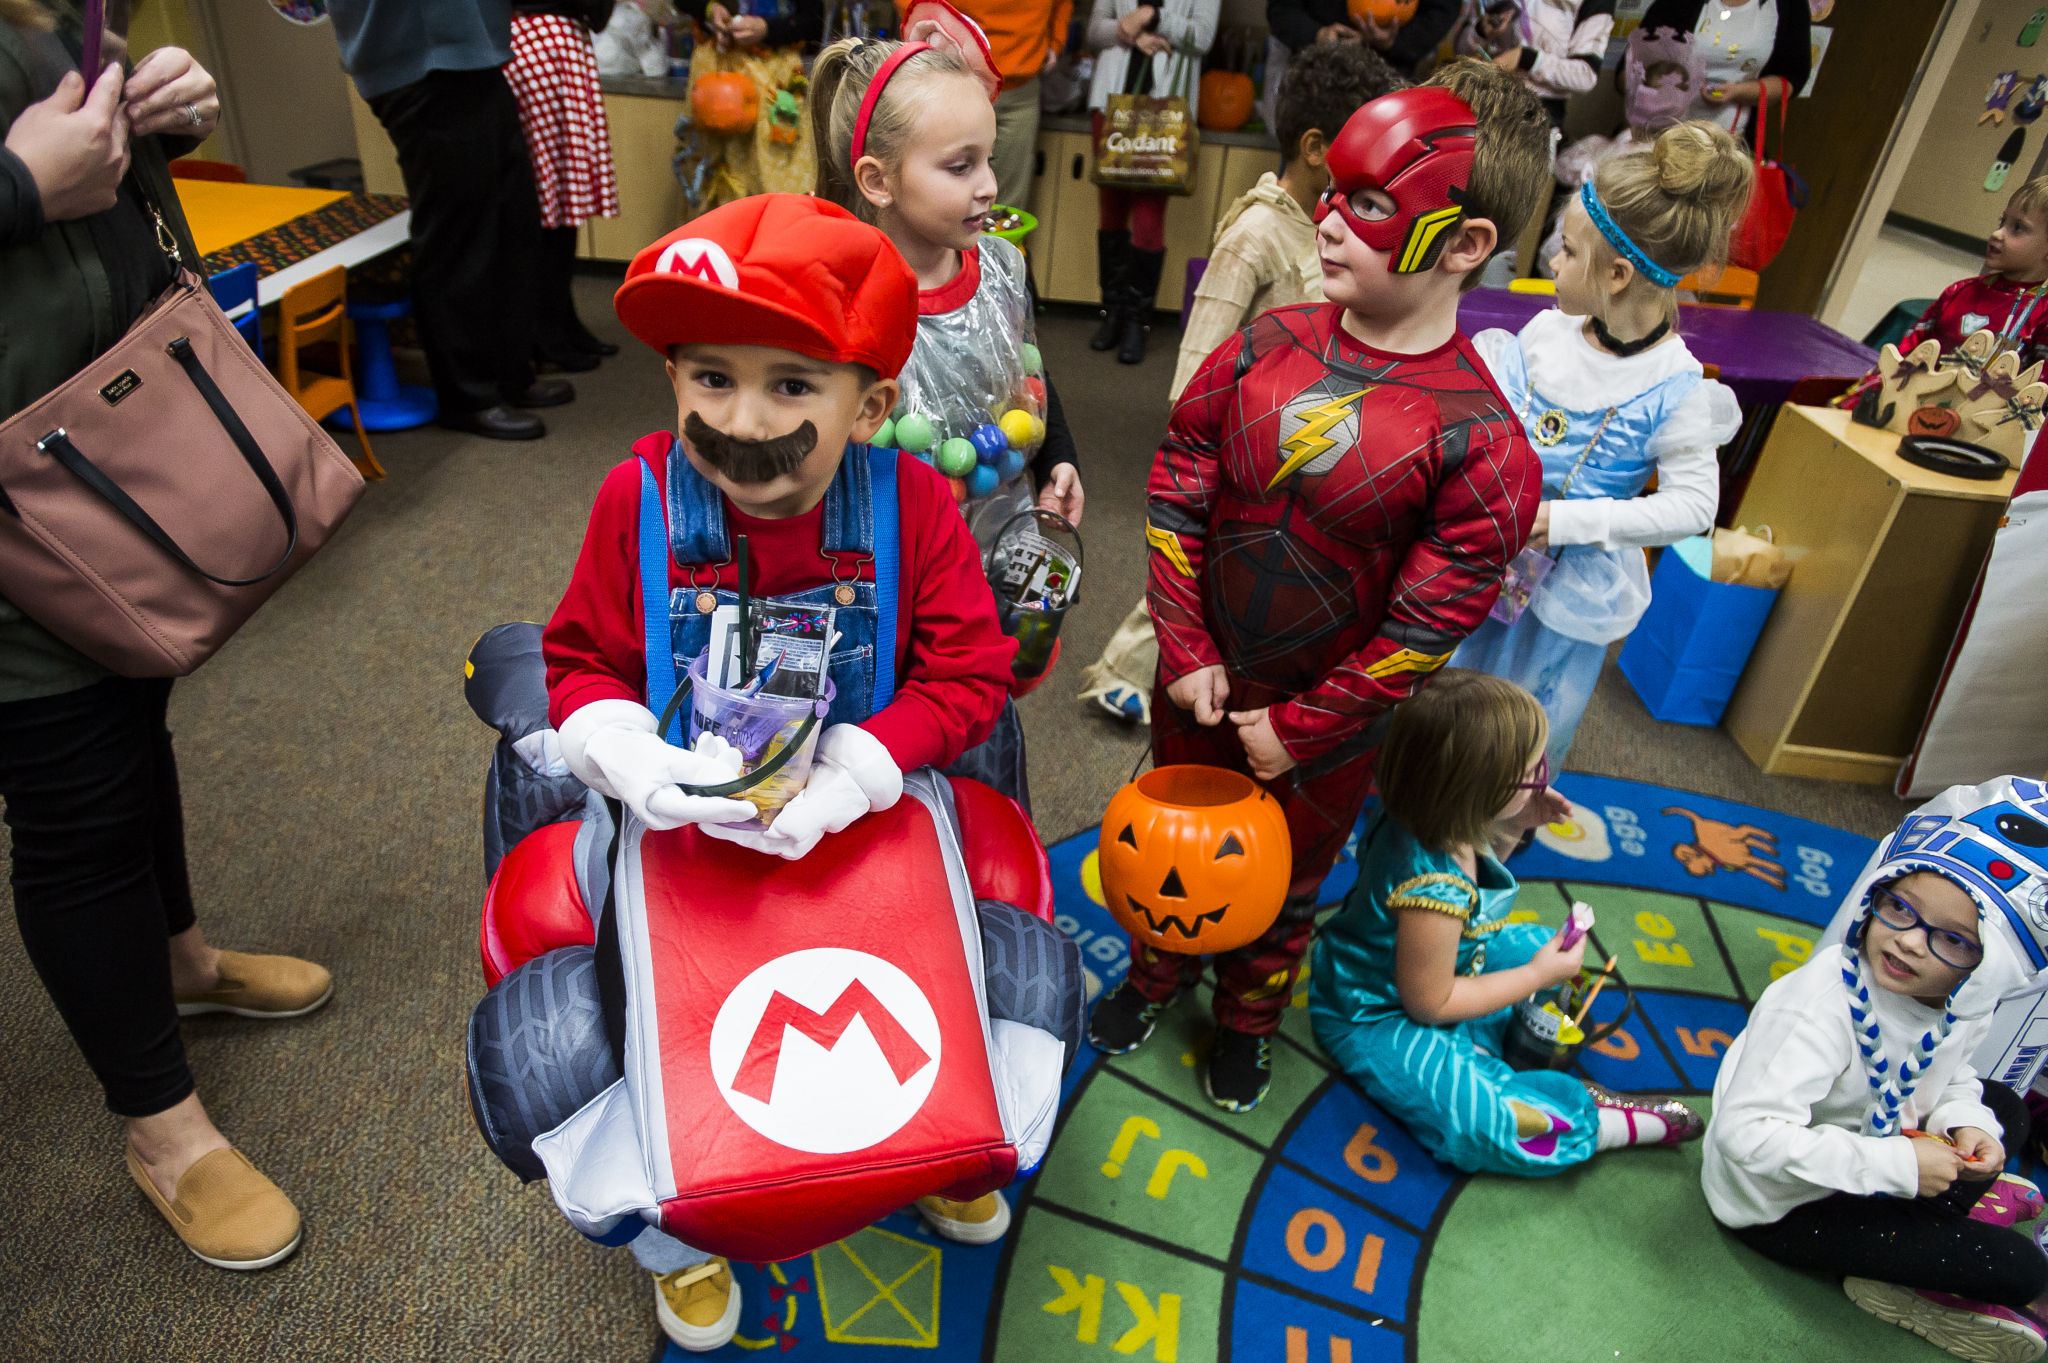 Downtown to host inaugural Boo Bash